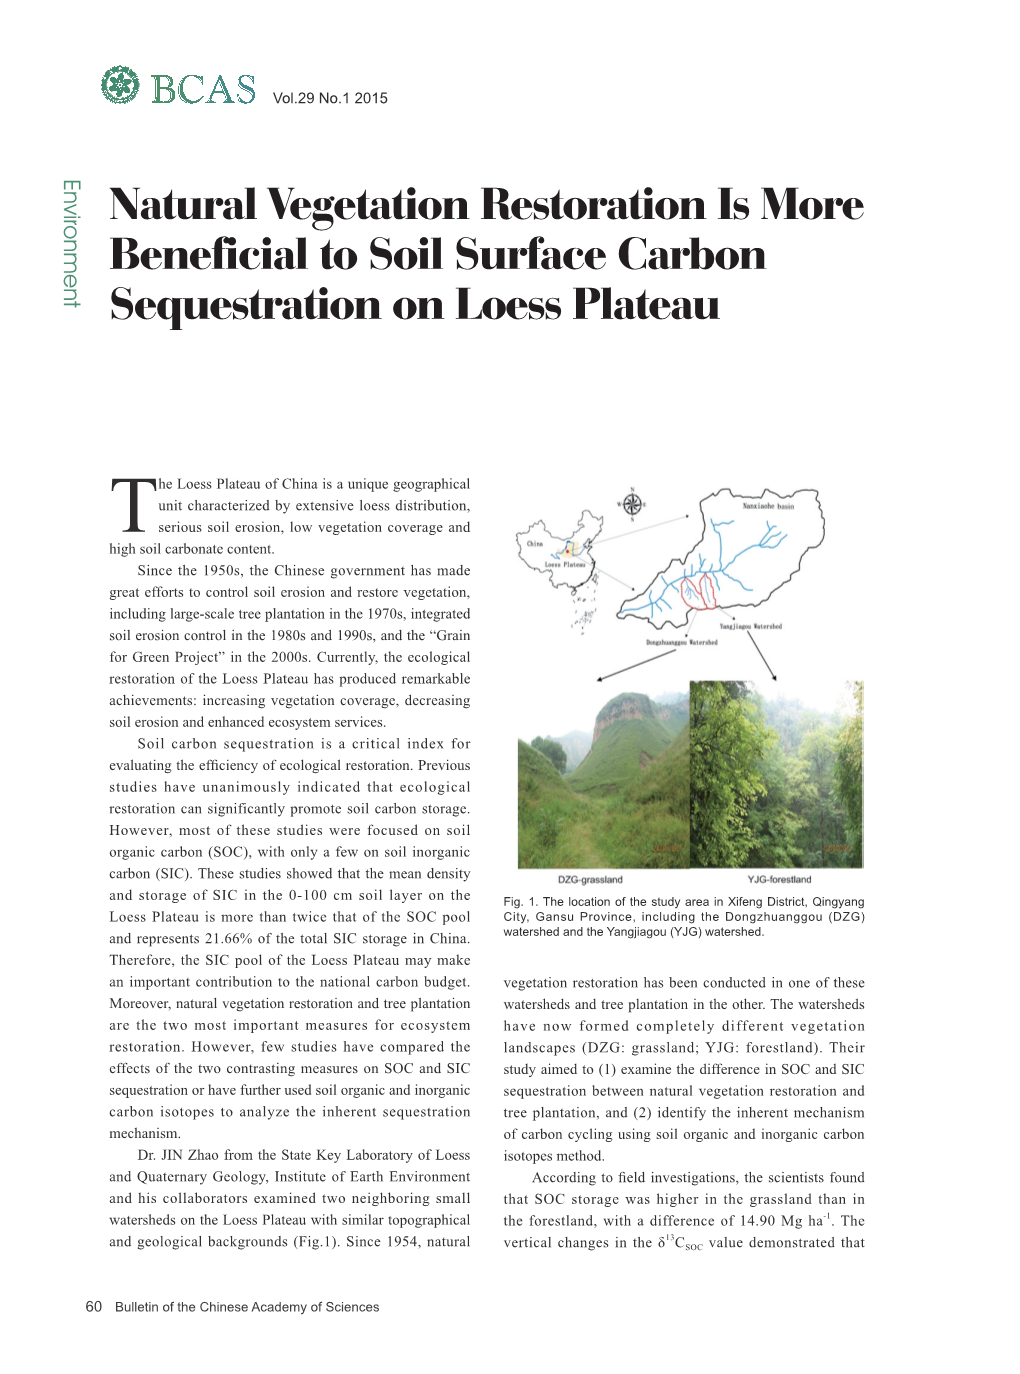 Natural Vegetation Restoration Is More Beneficial to Soil Surface Carbon Sequestration on Loess Plateau